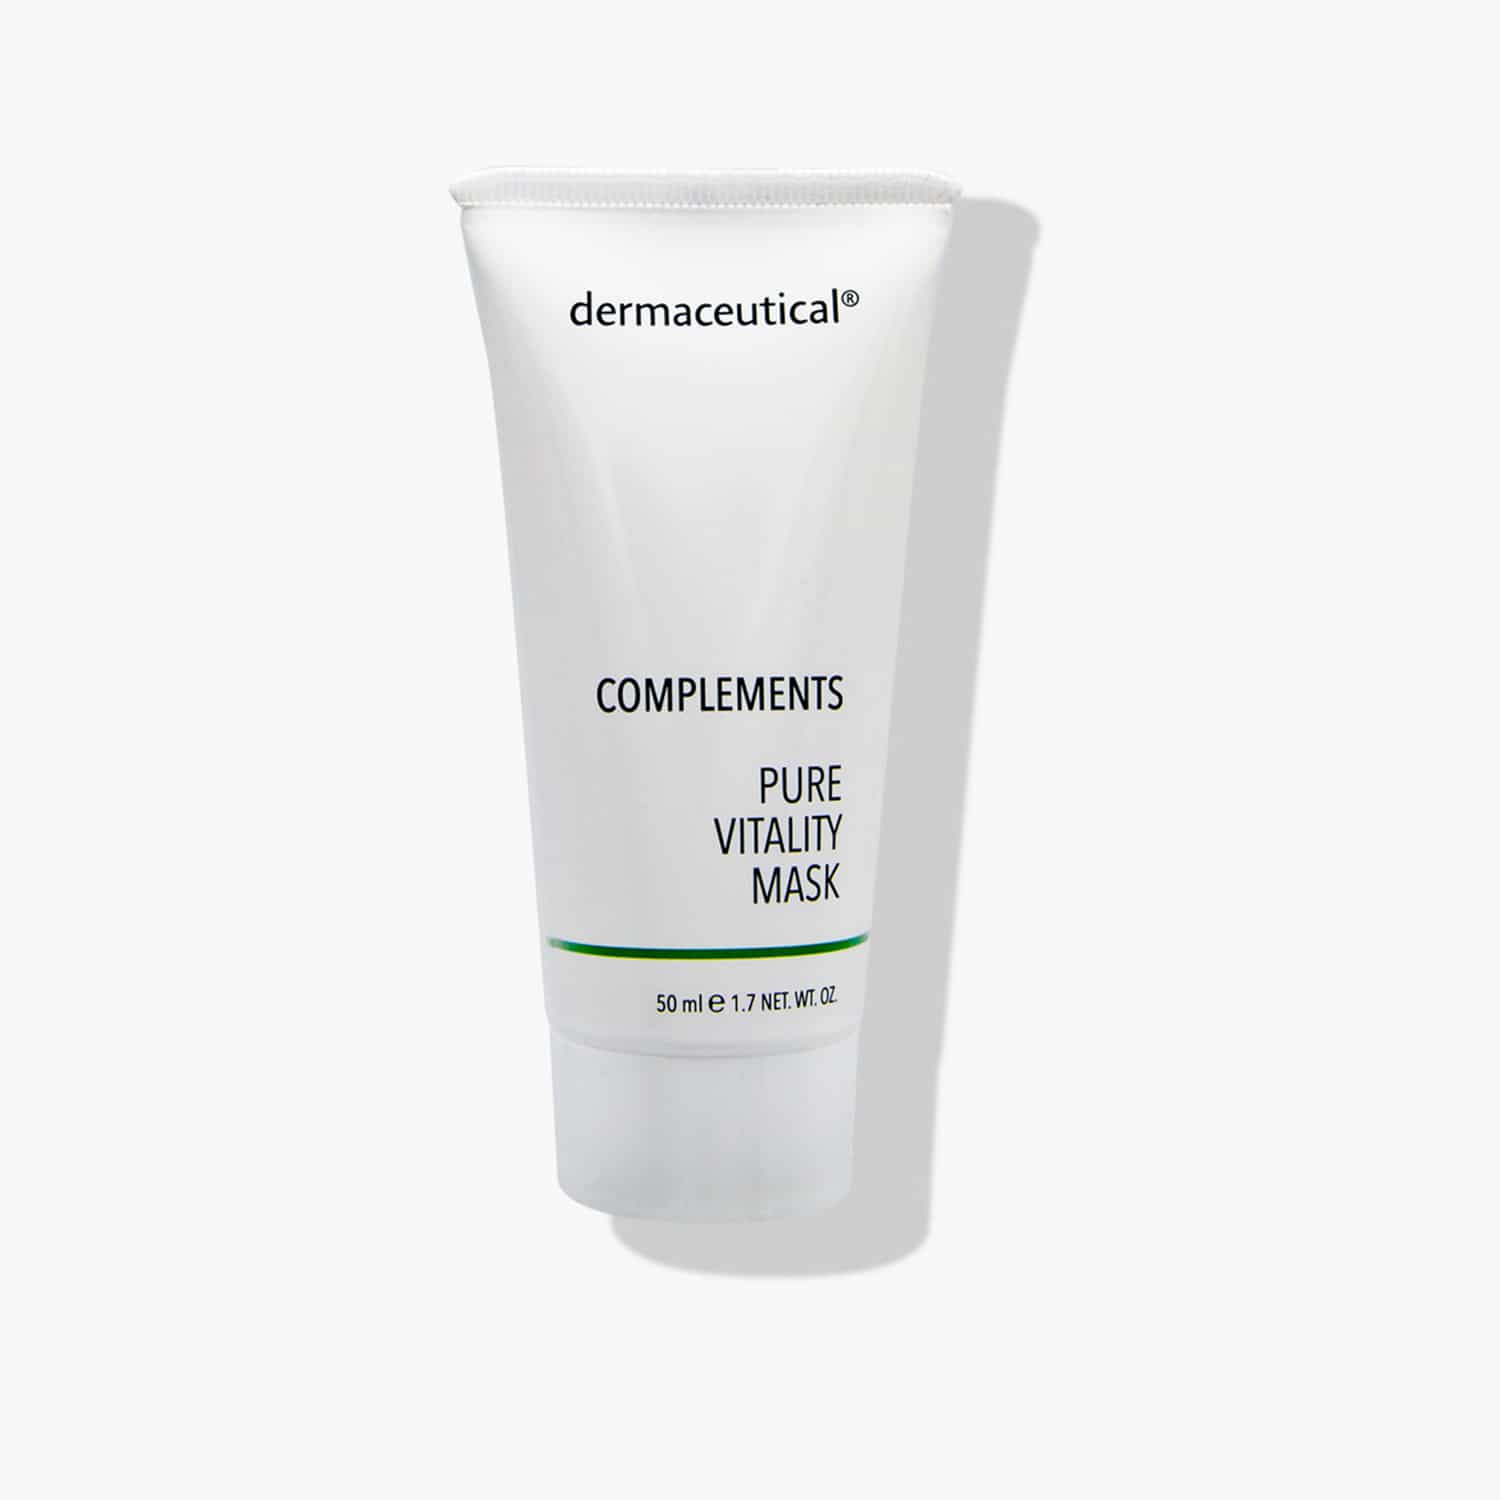 Dermaceutical Complements Pure Vitality Mask